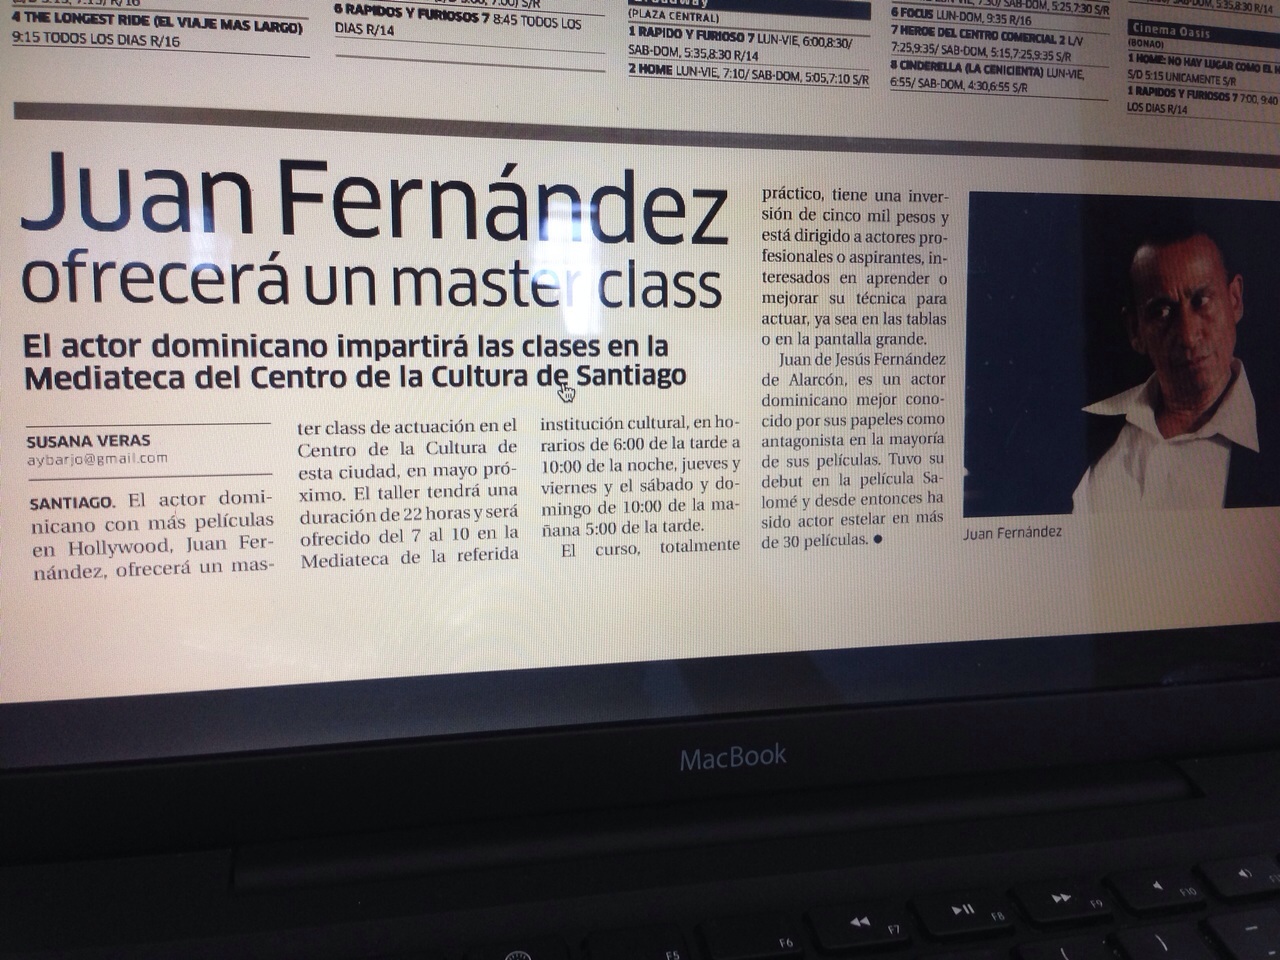 Newspaper article about Juan Fernández' Master Classes in acting in DR.